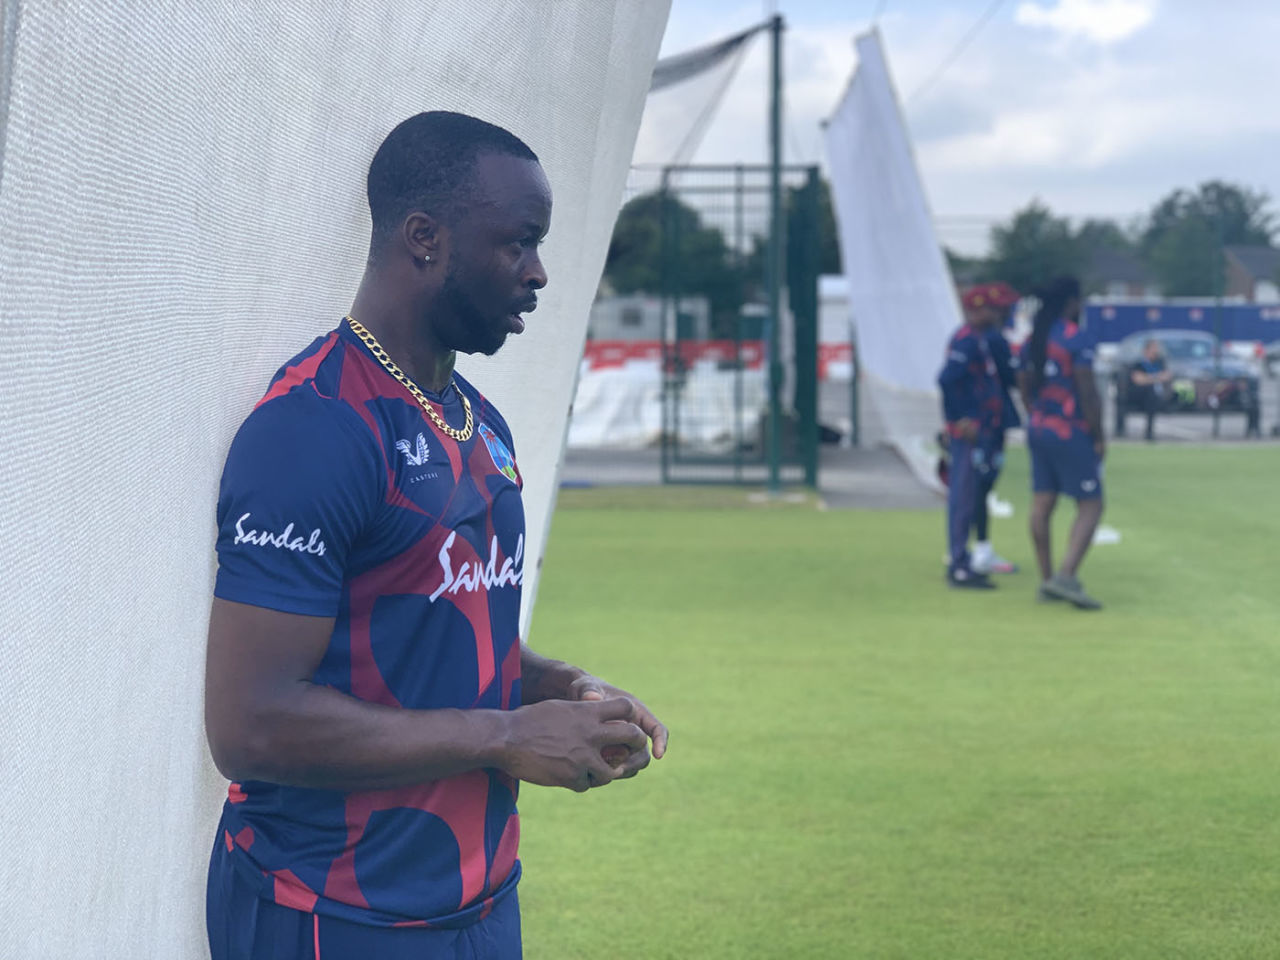 Kemar Roach prepares to bowl in the nets, Old Trafford, June 15, 2020